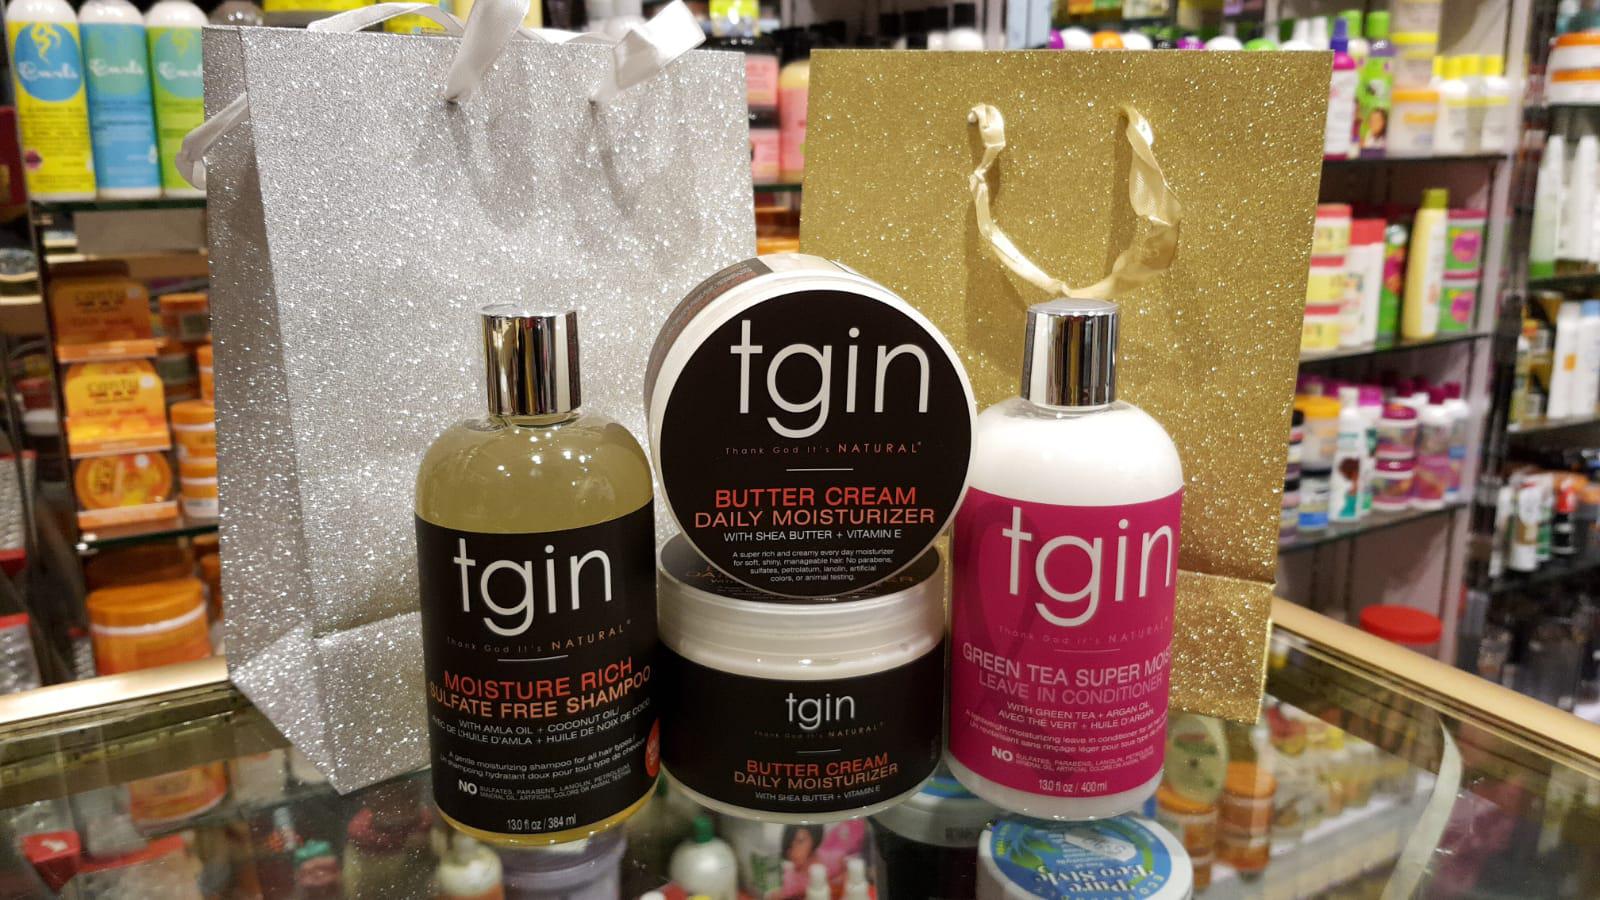 TGIN products